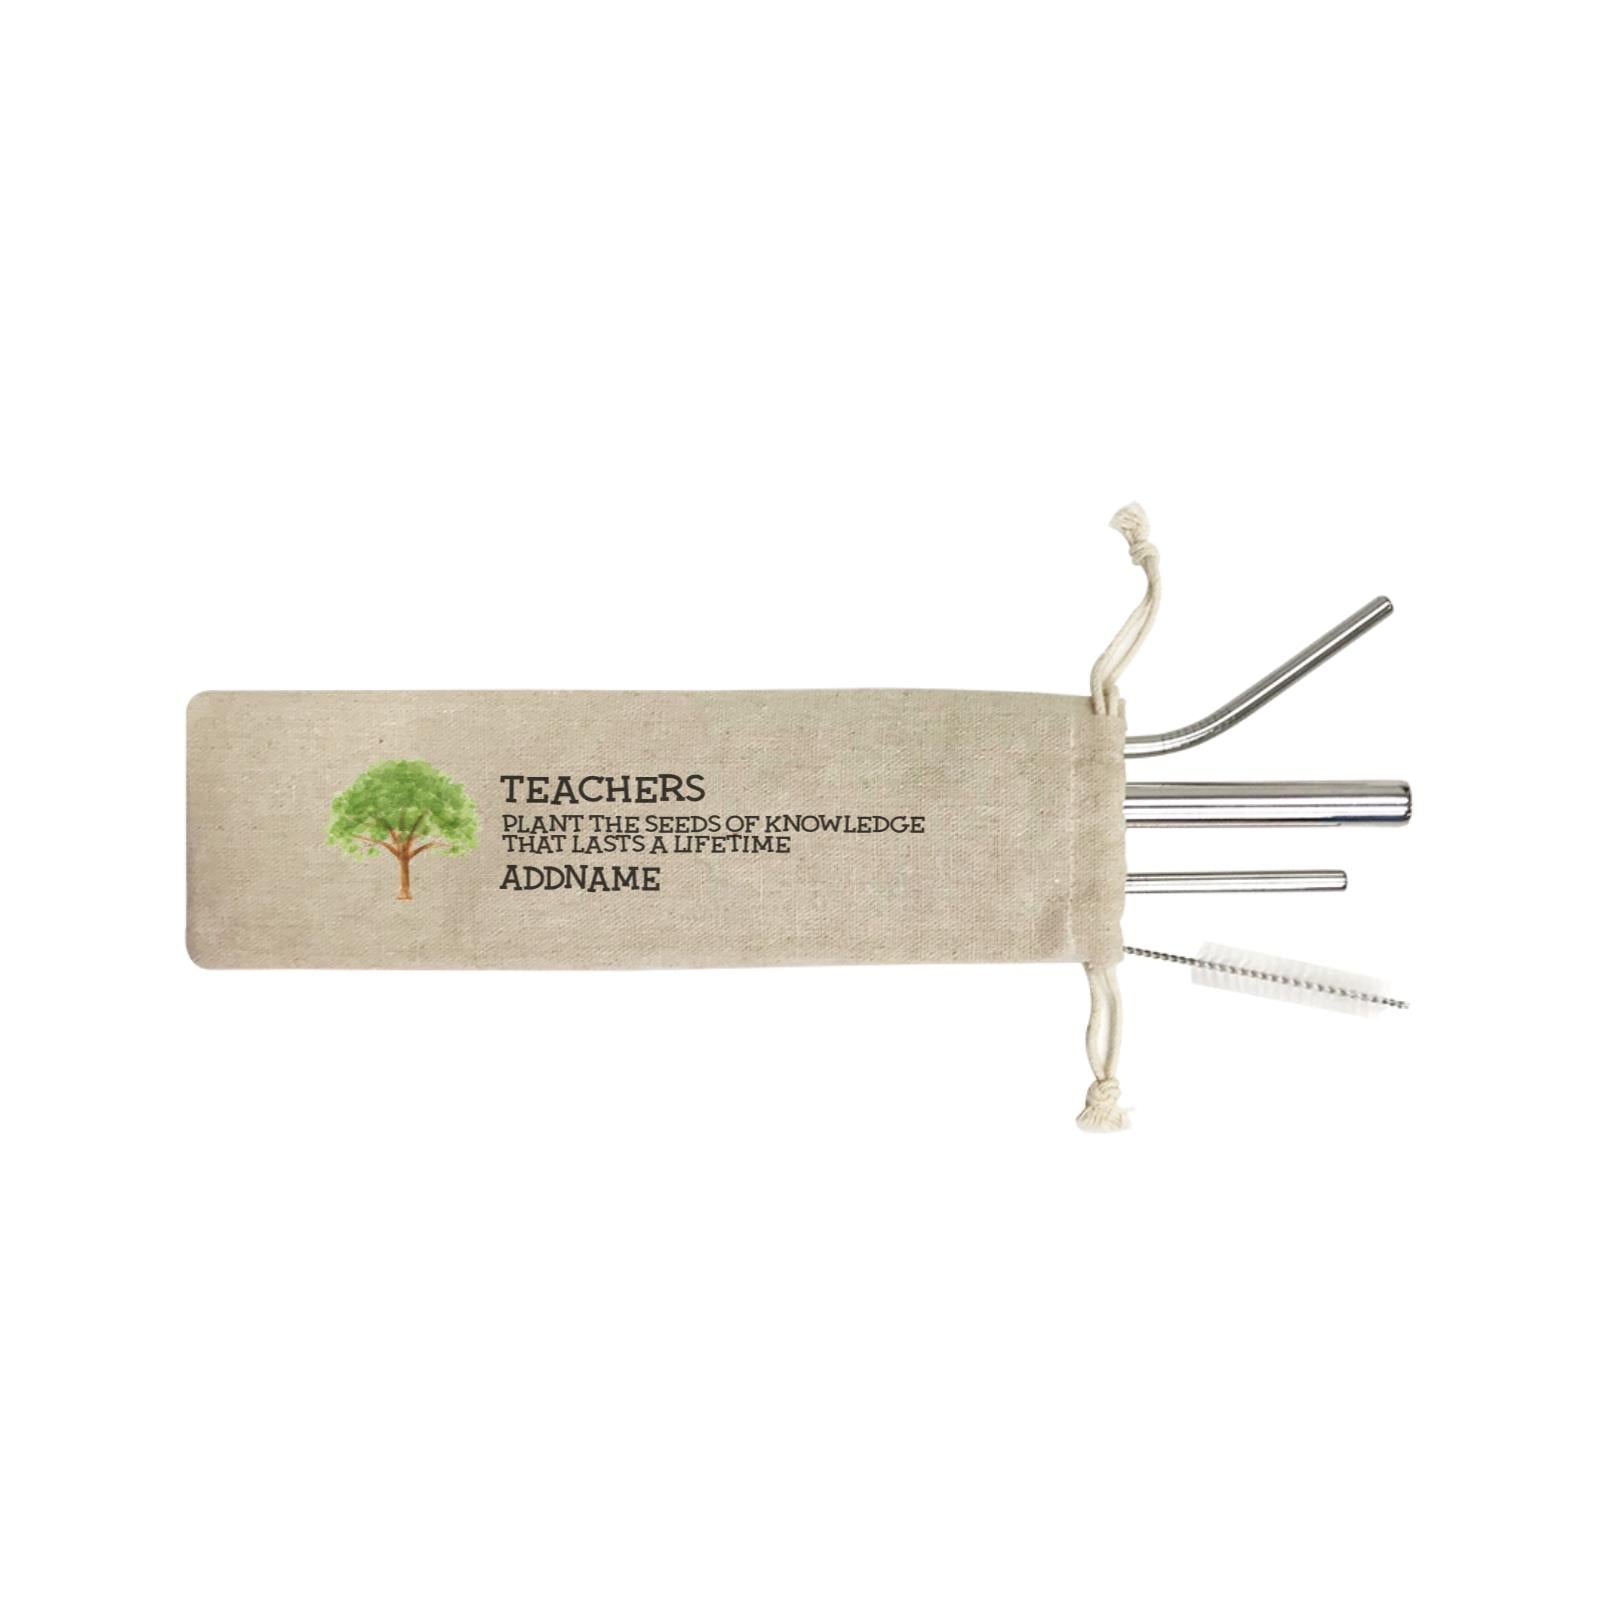 Teacher Quotes 2 Teachers Plant The Seeds Of Knowledge That Lasts A Lifetime Addname SB 4-In-1 Stainless Steel Straw Set in Satchel